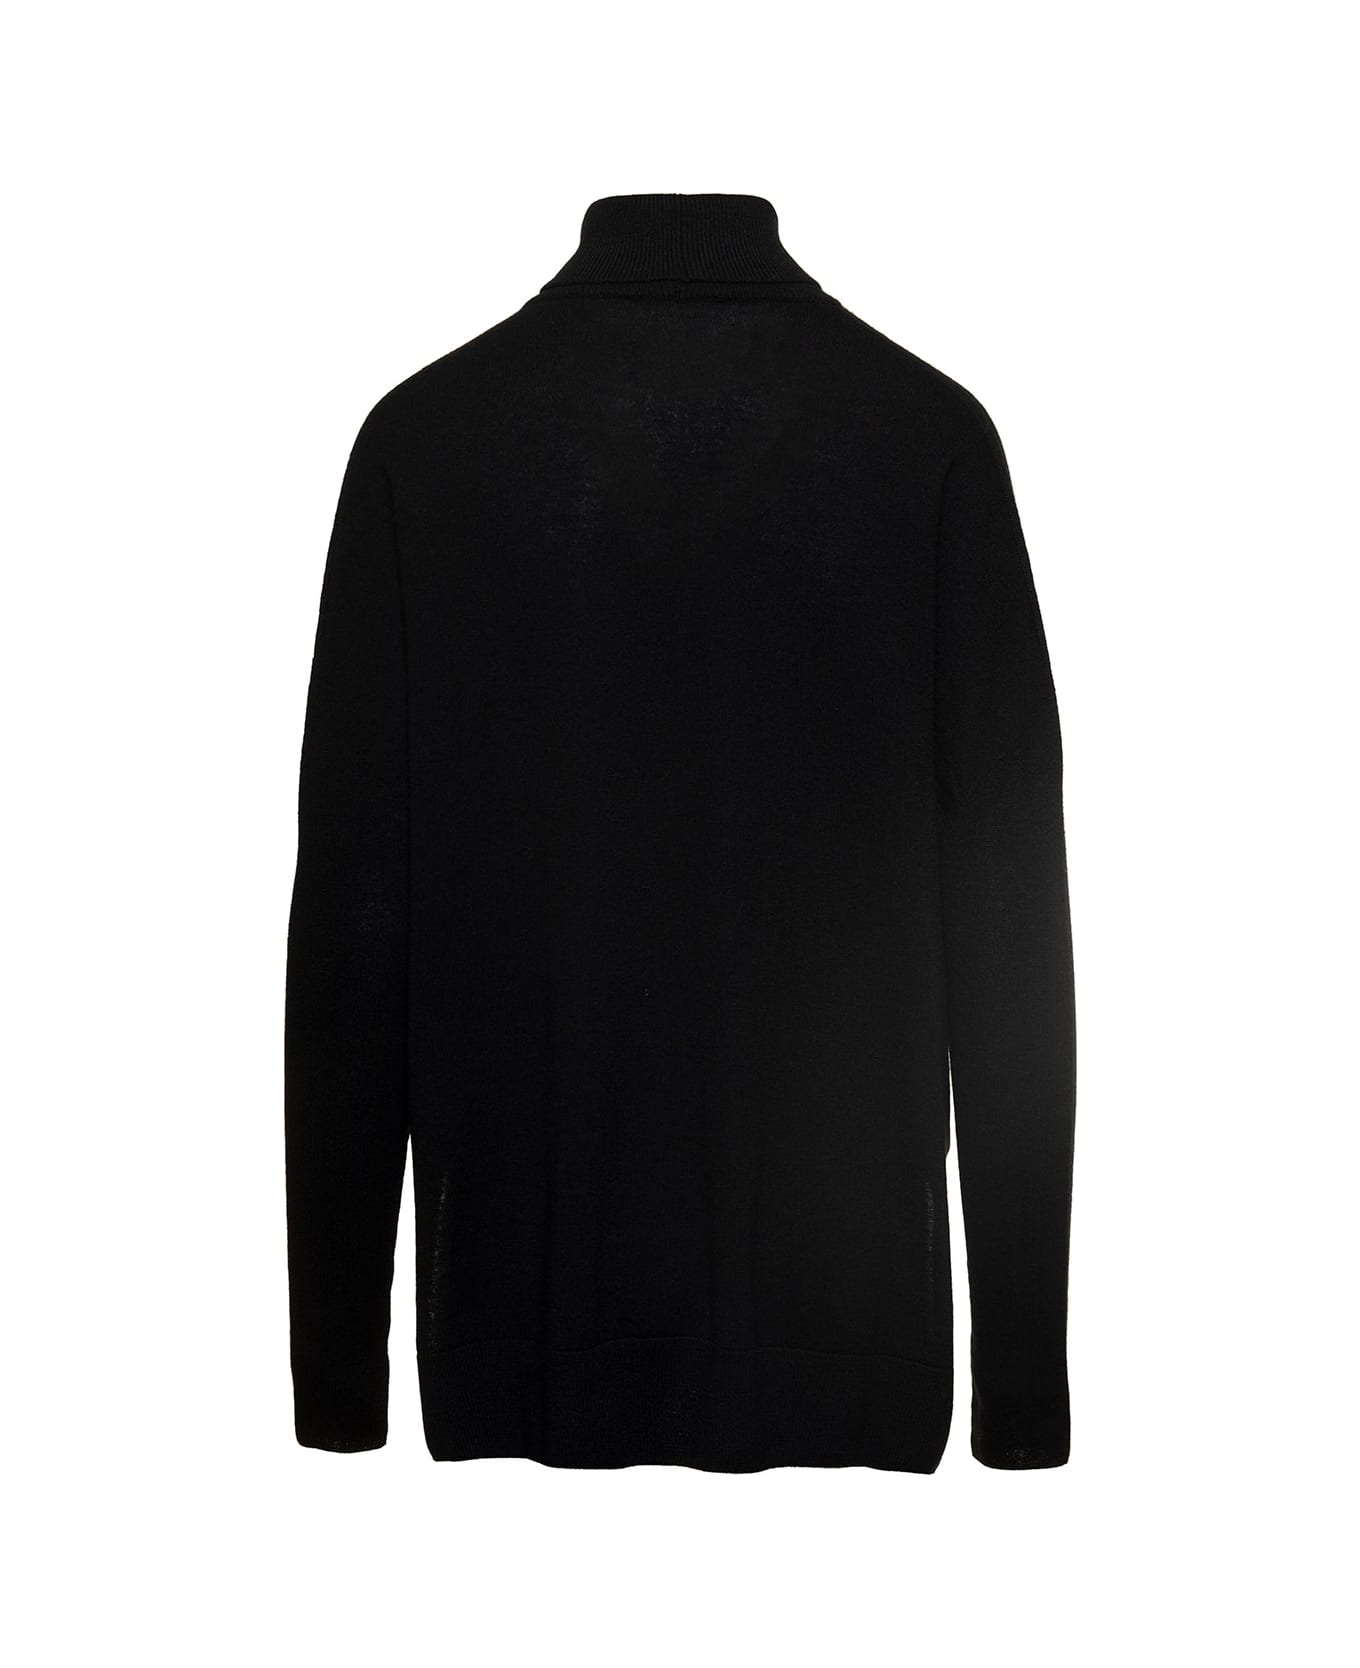 Antonelli Black Sweater With Mock Neck In Wool And Cashmere Woman - Black